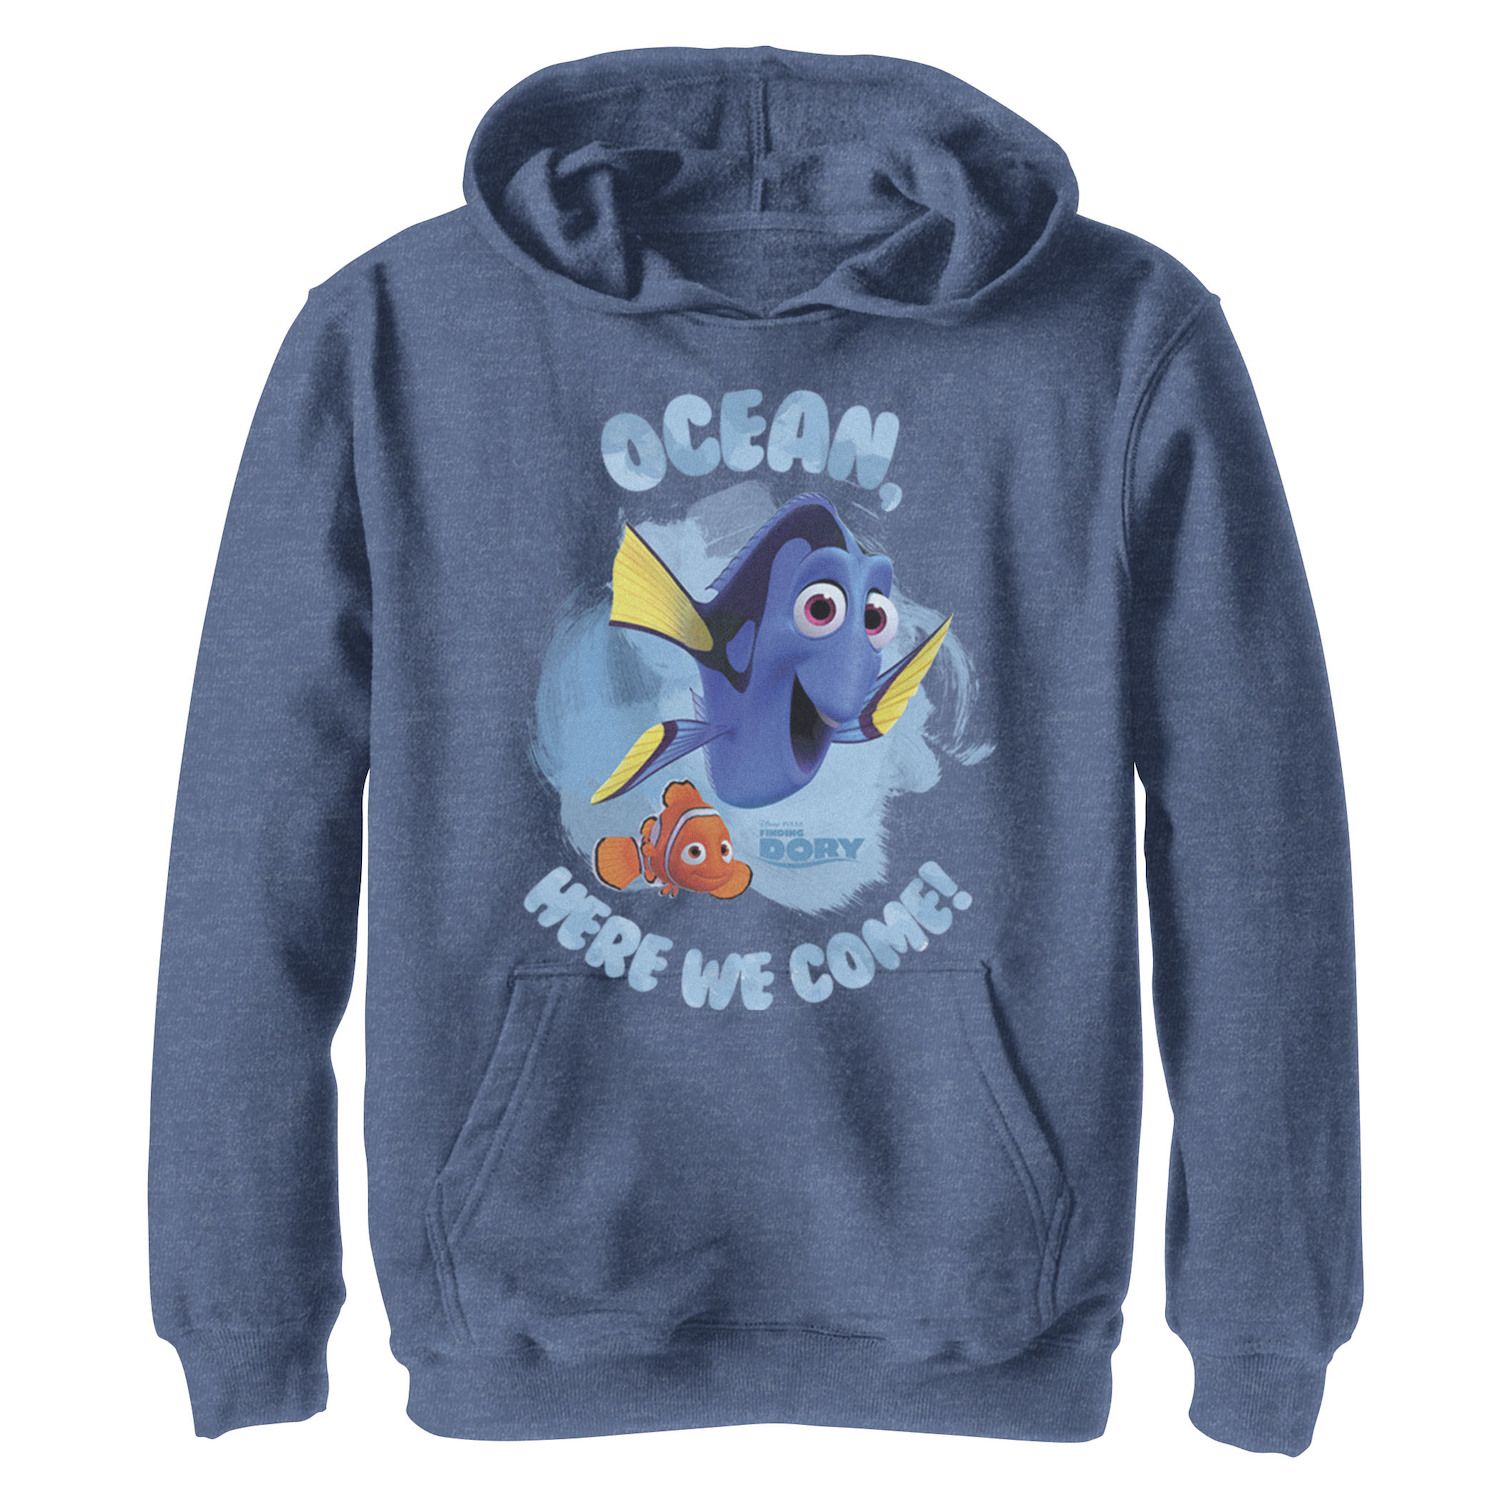 Image for Disney / Pixar 's Finding Dory Boys 8-20 Ocean Here We Come Graphic Fleece Hoodie at Kohl's.